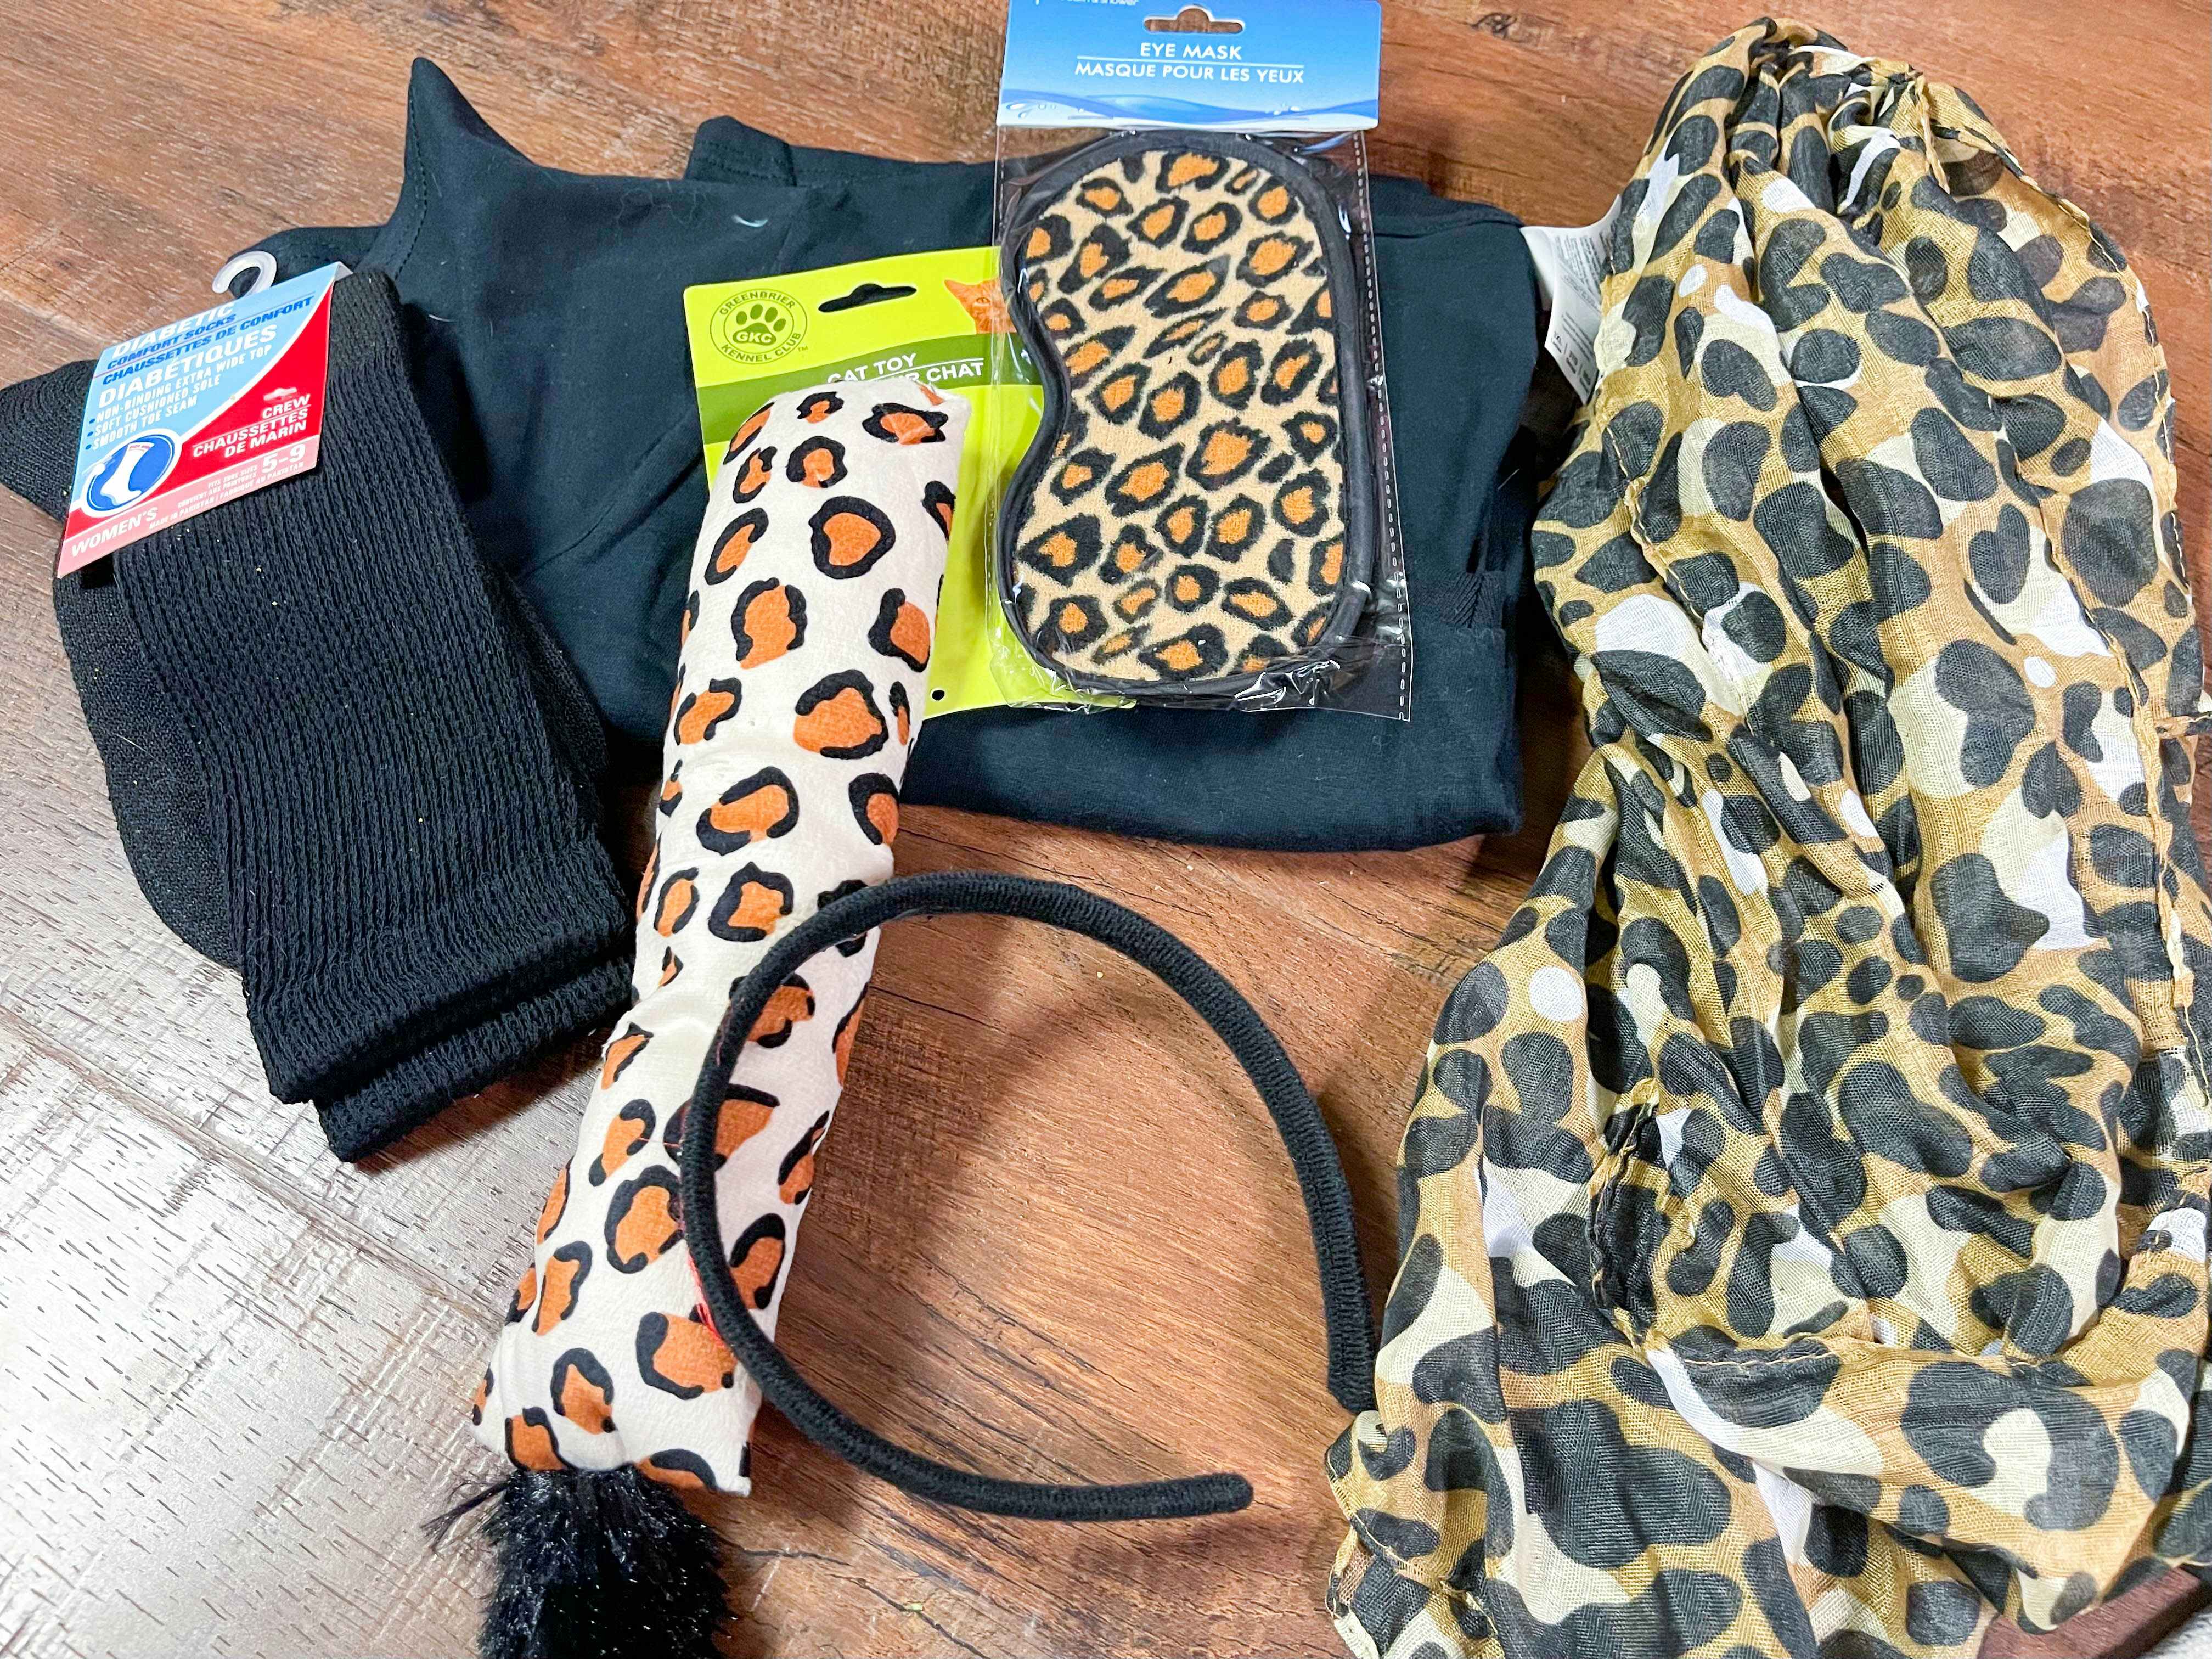 Some items from Dollar Tree that can be used to make a cat costume piled together on a wood floor.